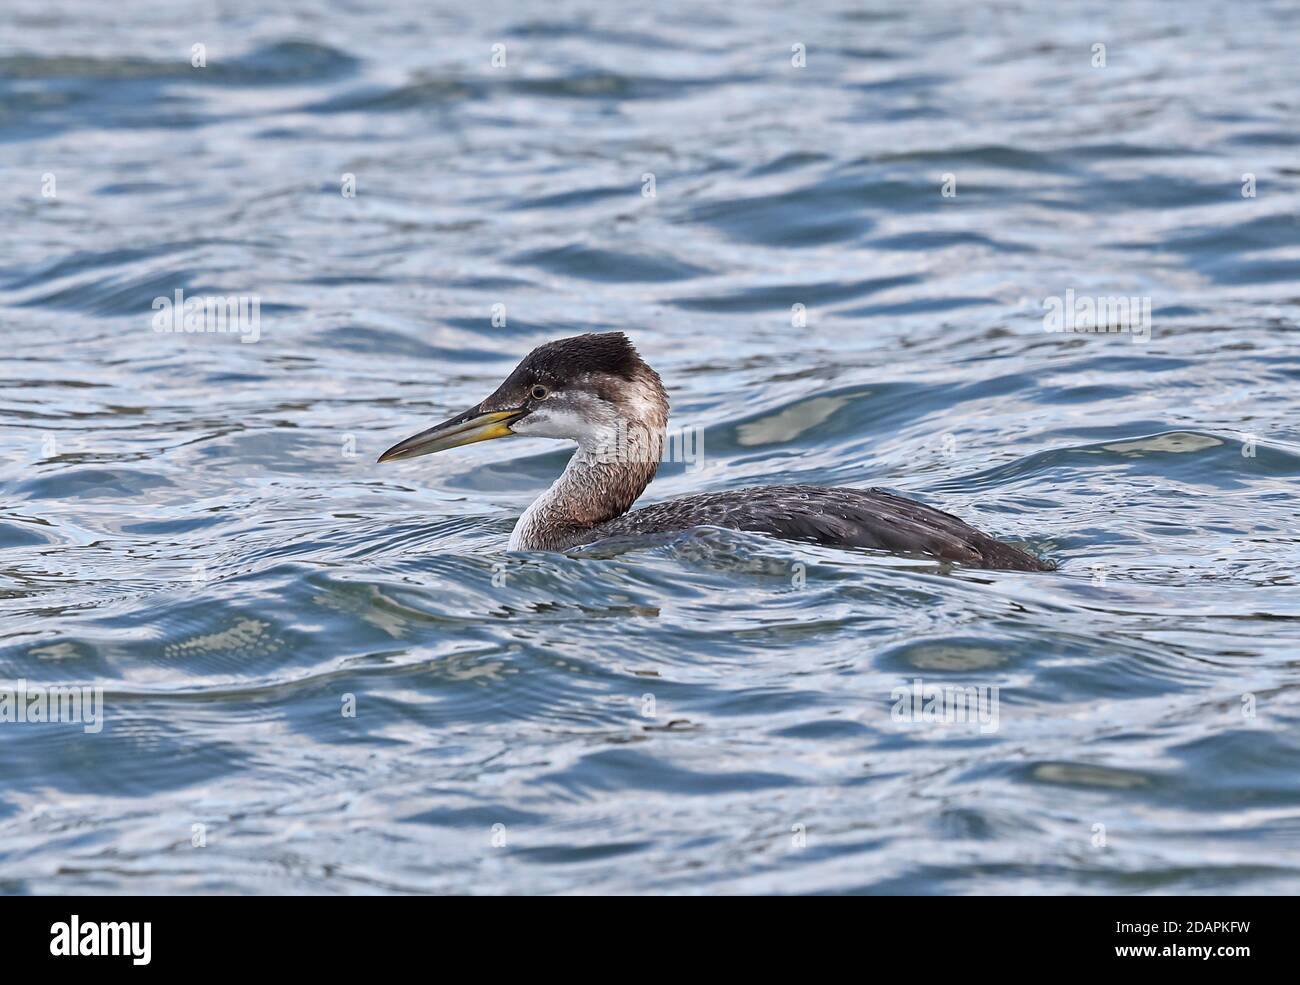 Red-necked Grebe (Podiceps grisegena holbollii) first winter plumage swimming in harbour  Choshi, Chiba Prefecture, Japan        February Stock Photo